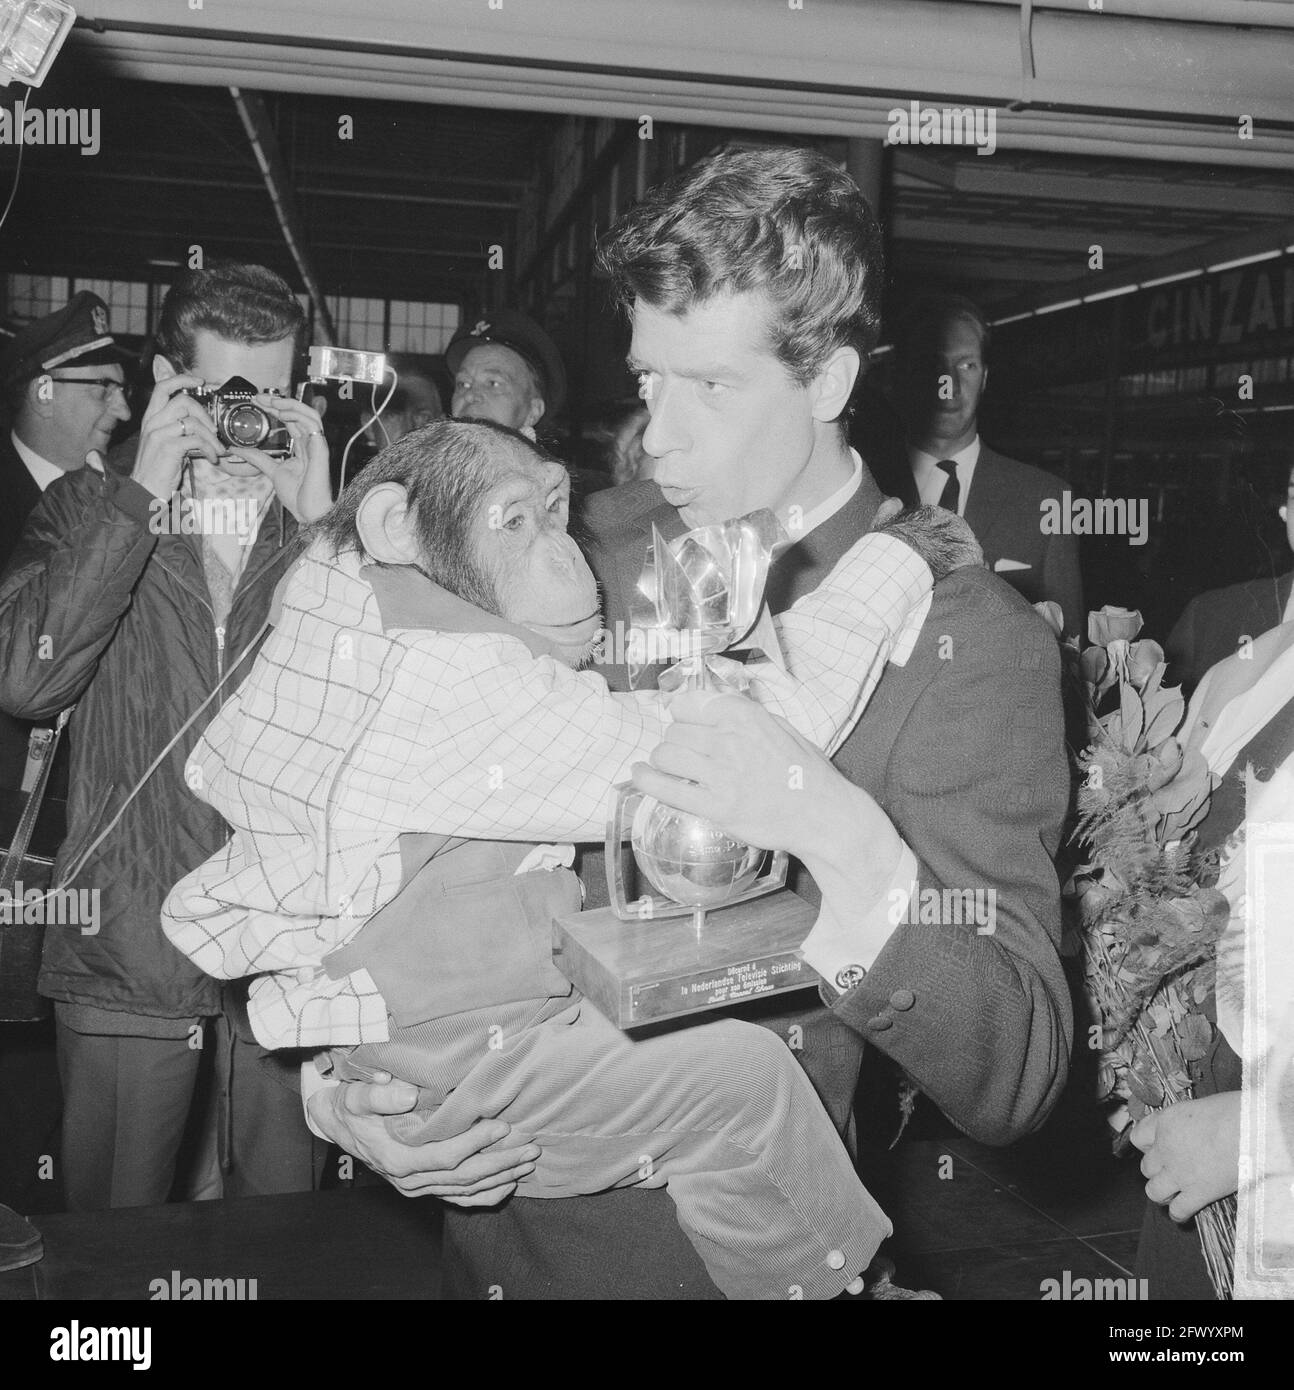 Rudi Carrell has won the silver rose. Rudi Carrell with chimpanzee Plato playing in his show, April 25, 1964, chimpanzees, The Netherlands, 20th century press agency photo, news to remember, documentary, historic photography 1945-1990, visual stories, human history of the Twentieth Century, capturing moments in time Stock Photo